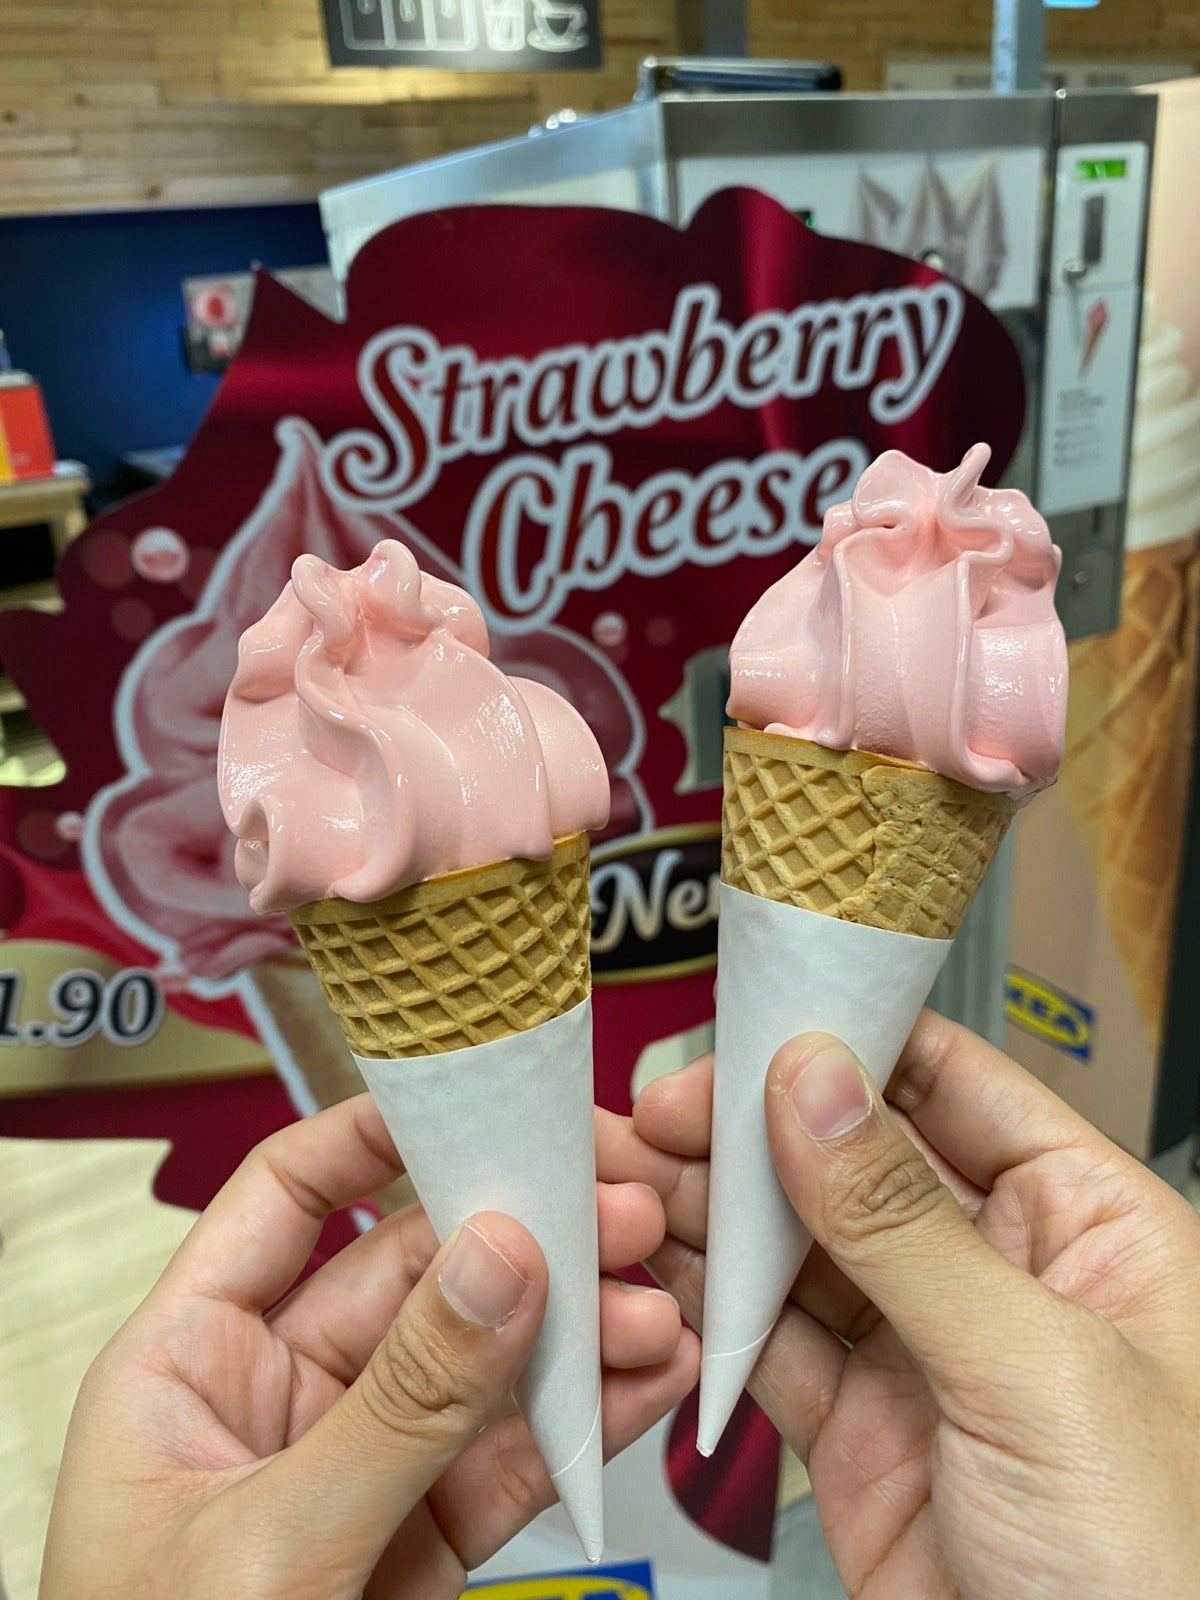 Do You Know That Ikea Now Has Strawberry Ice Cream &Amp; Also Brown Sugar Boba?! - World Of Buzz 7